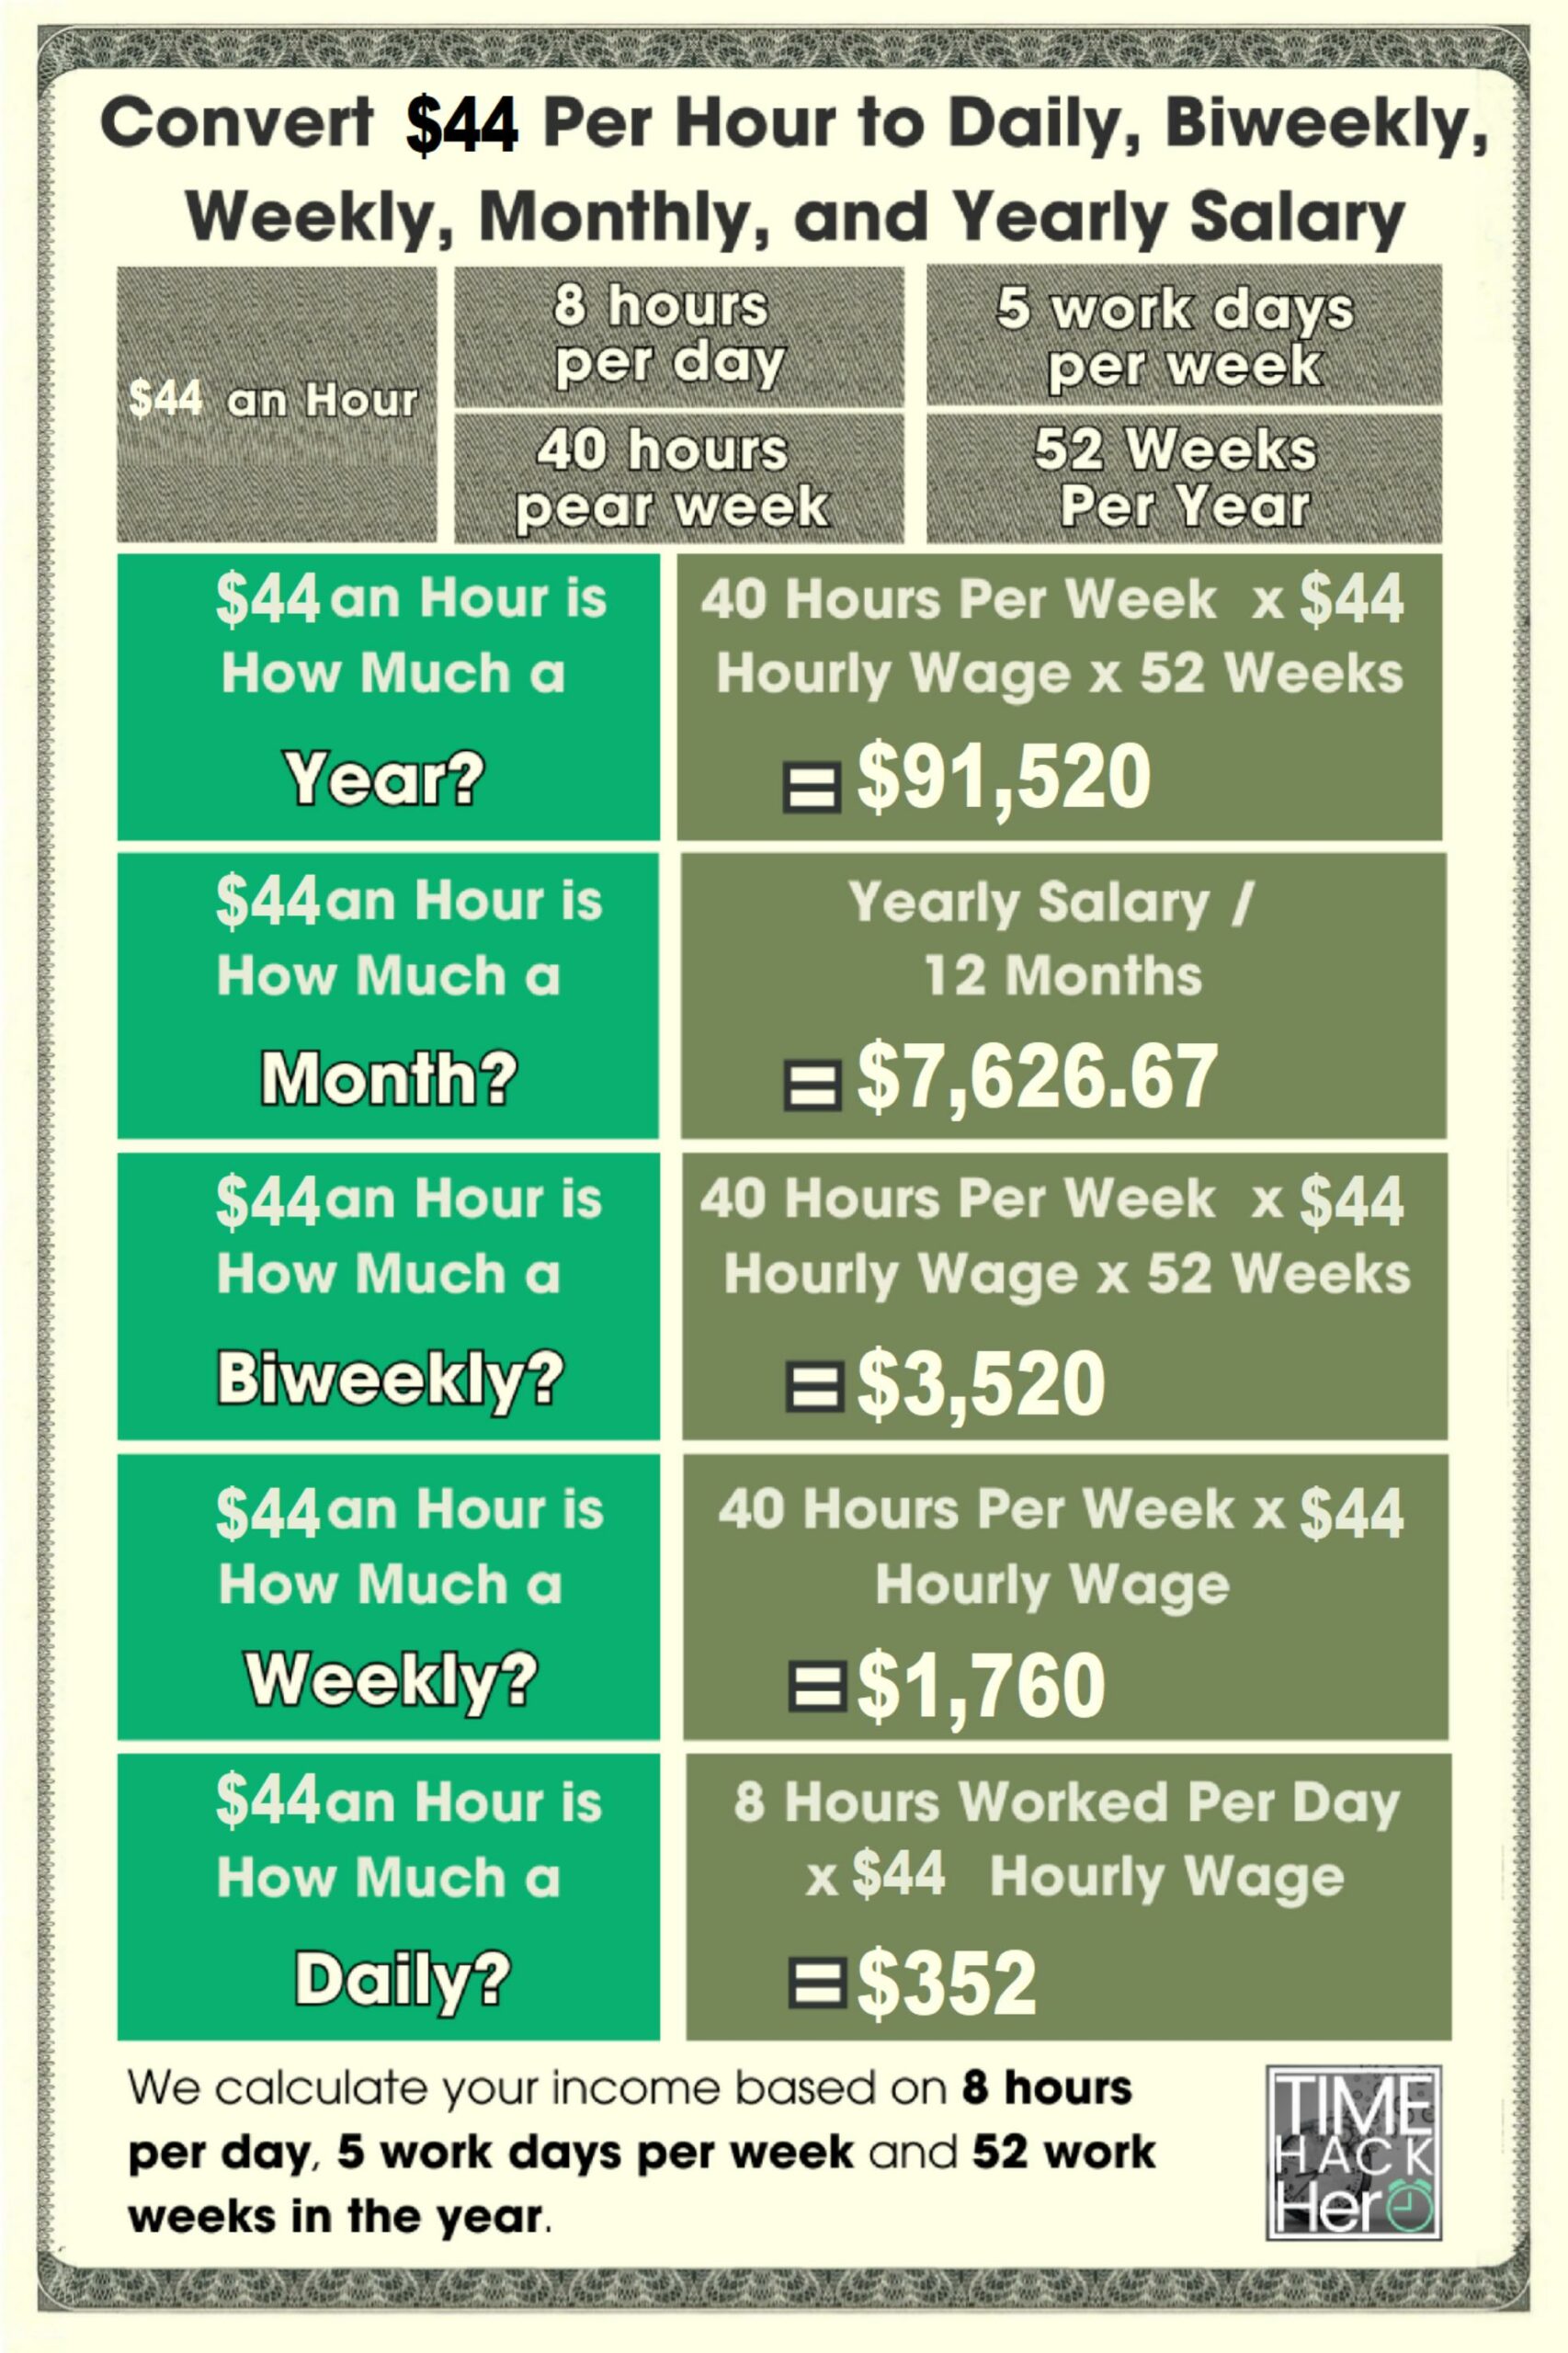 Convert $44 Per Hour to Weekly, Monthly, and Yearly Salary